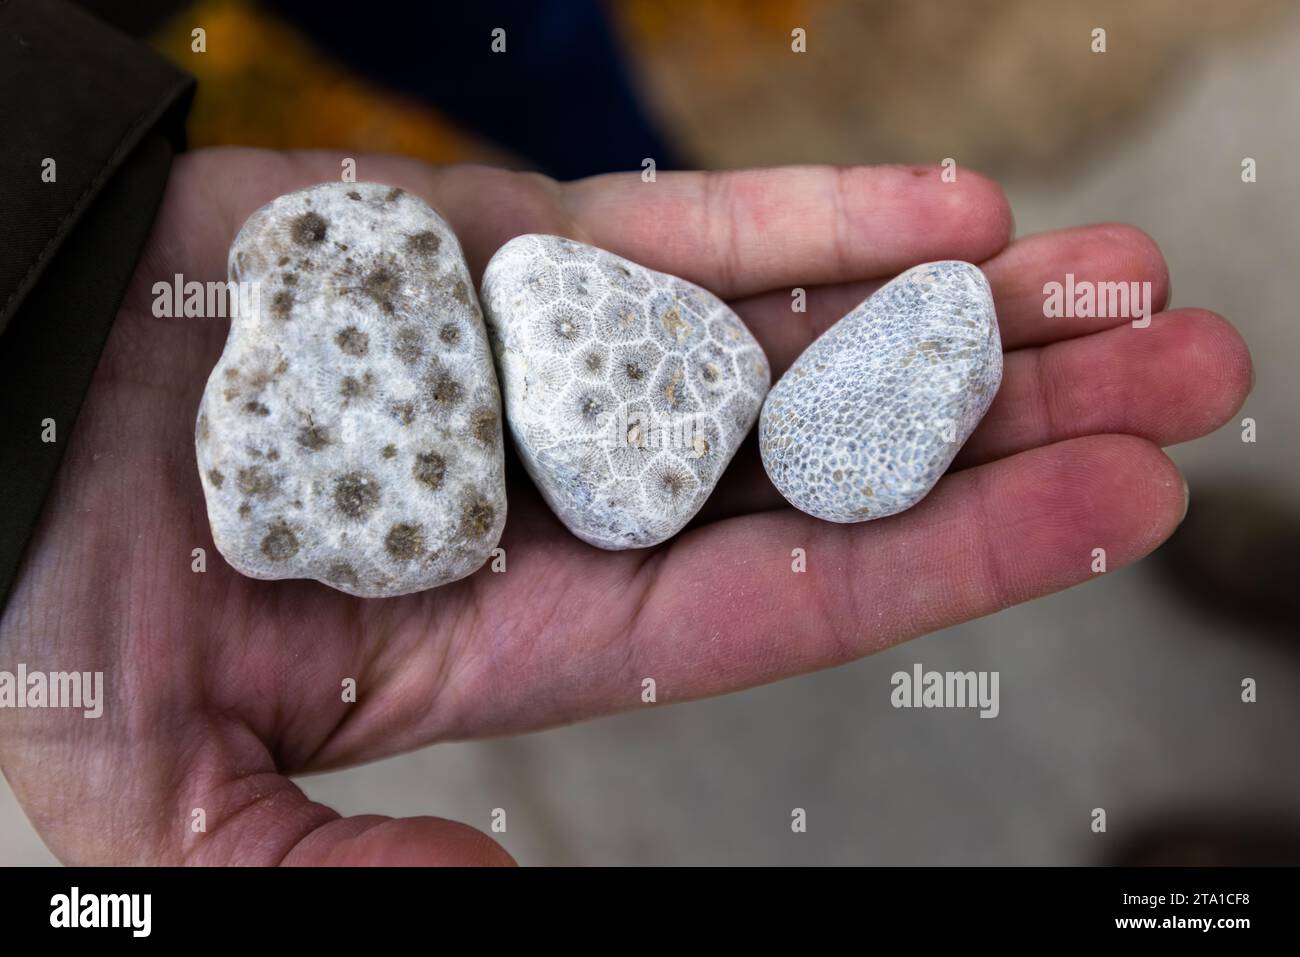 Petoskey stones were first found in Petoskey, Michigan. The stone, which consists of fossilized coral skeletons, can also be found on Charlevoix beach. When the stone is moistened, a honeycomb pattern becomes visible. Charlevoix and Petoskey stones can be found on Charlevoix beach, especially in strong winds and swells. Charlevoix, United States Stock Photo